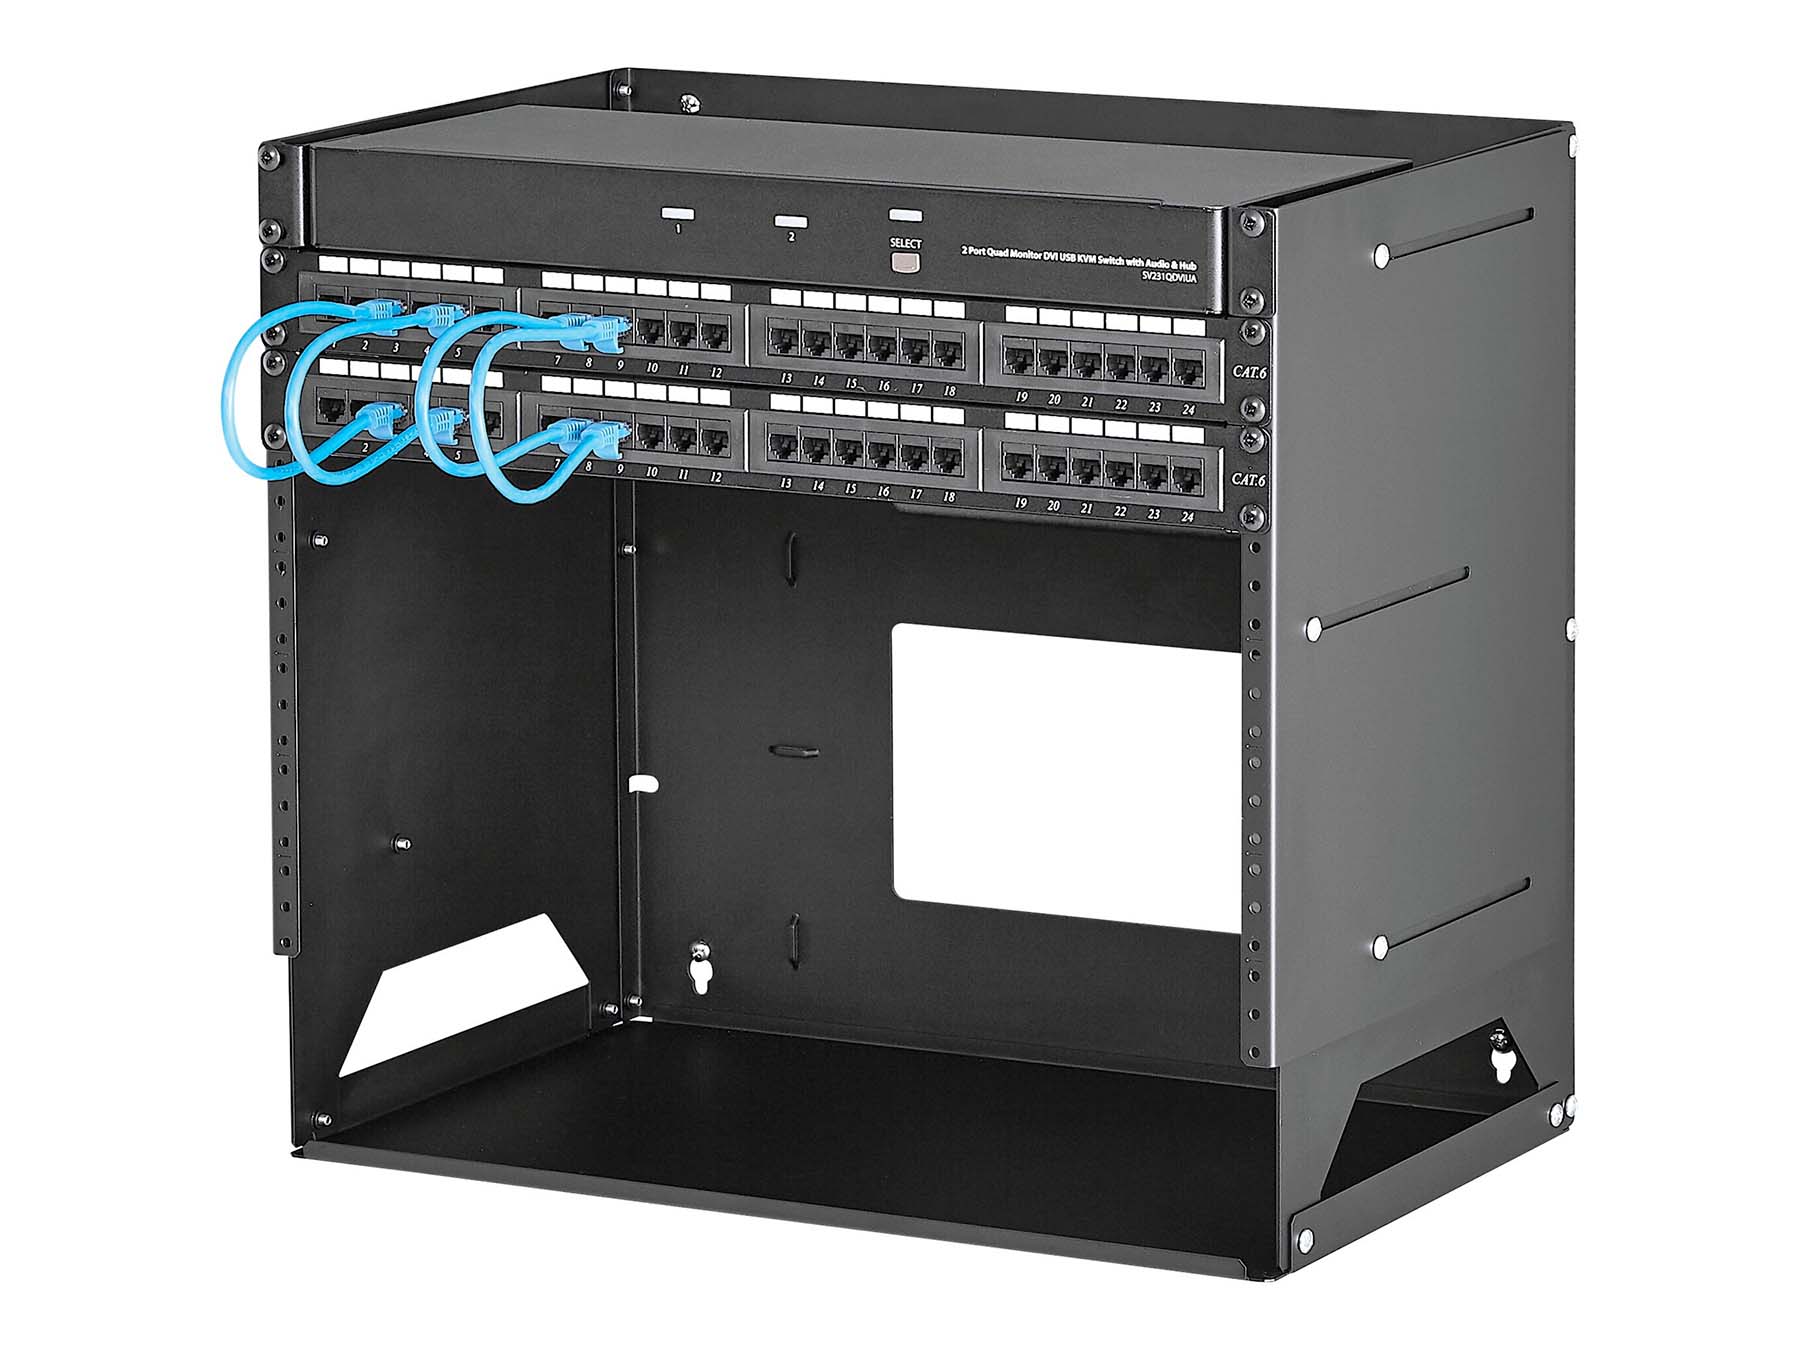 * unit rack for ethernet switch and structured cabling